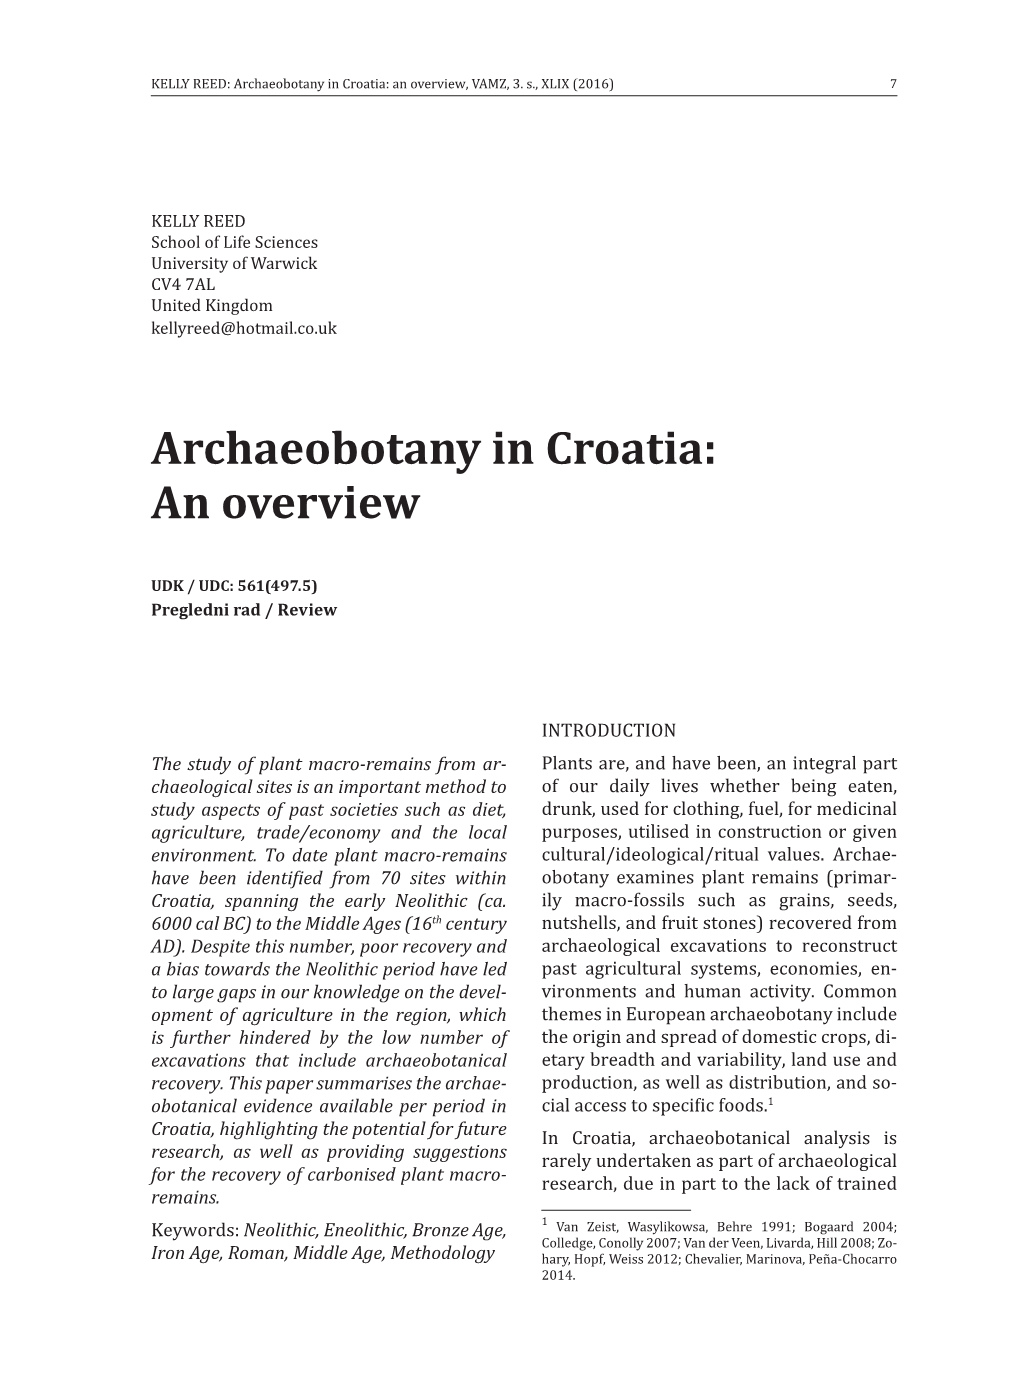 Archaeobotany in Croatia: an Overview